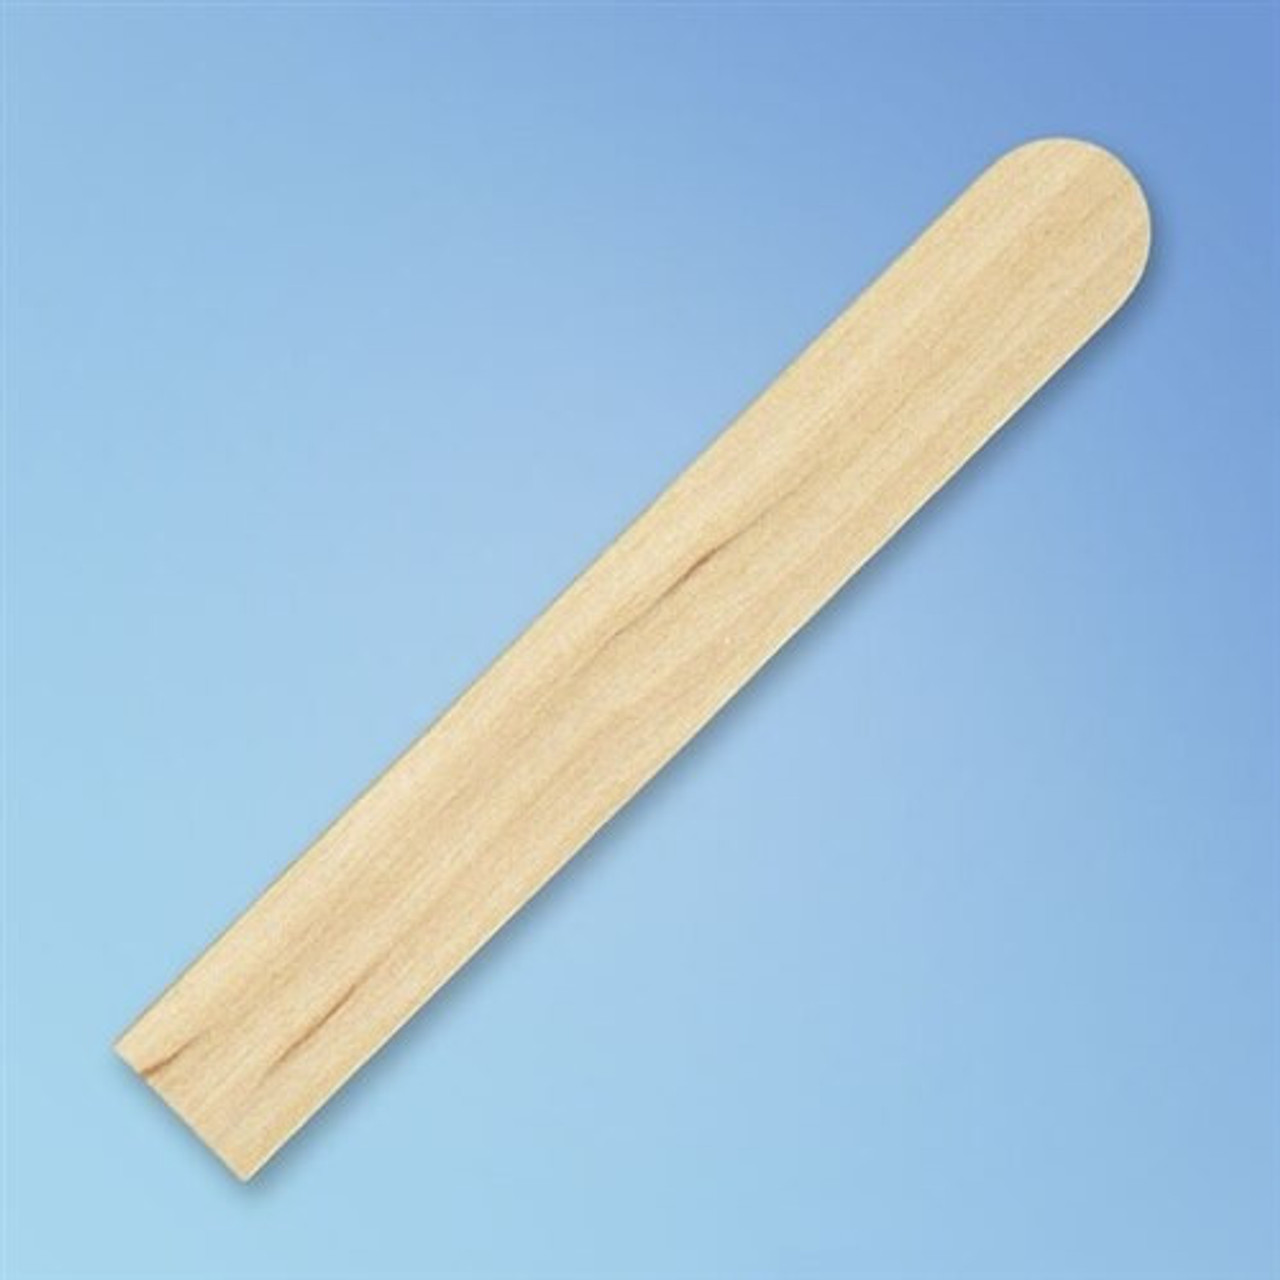 Tongue Depressor Wood Mixing Sticks – Pack of 25 - Composite Envisions